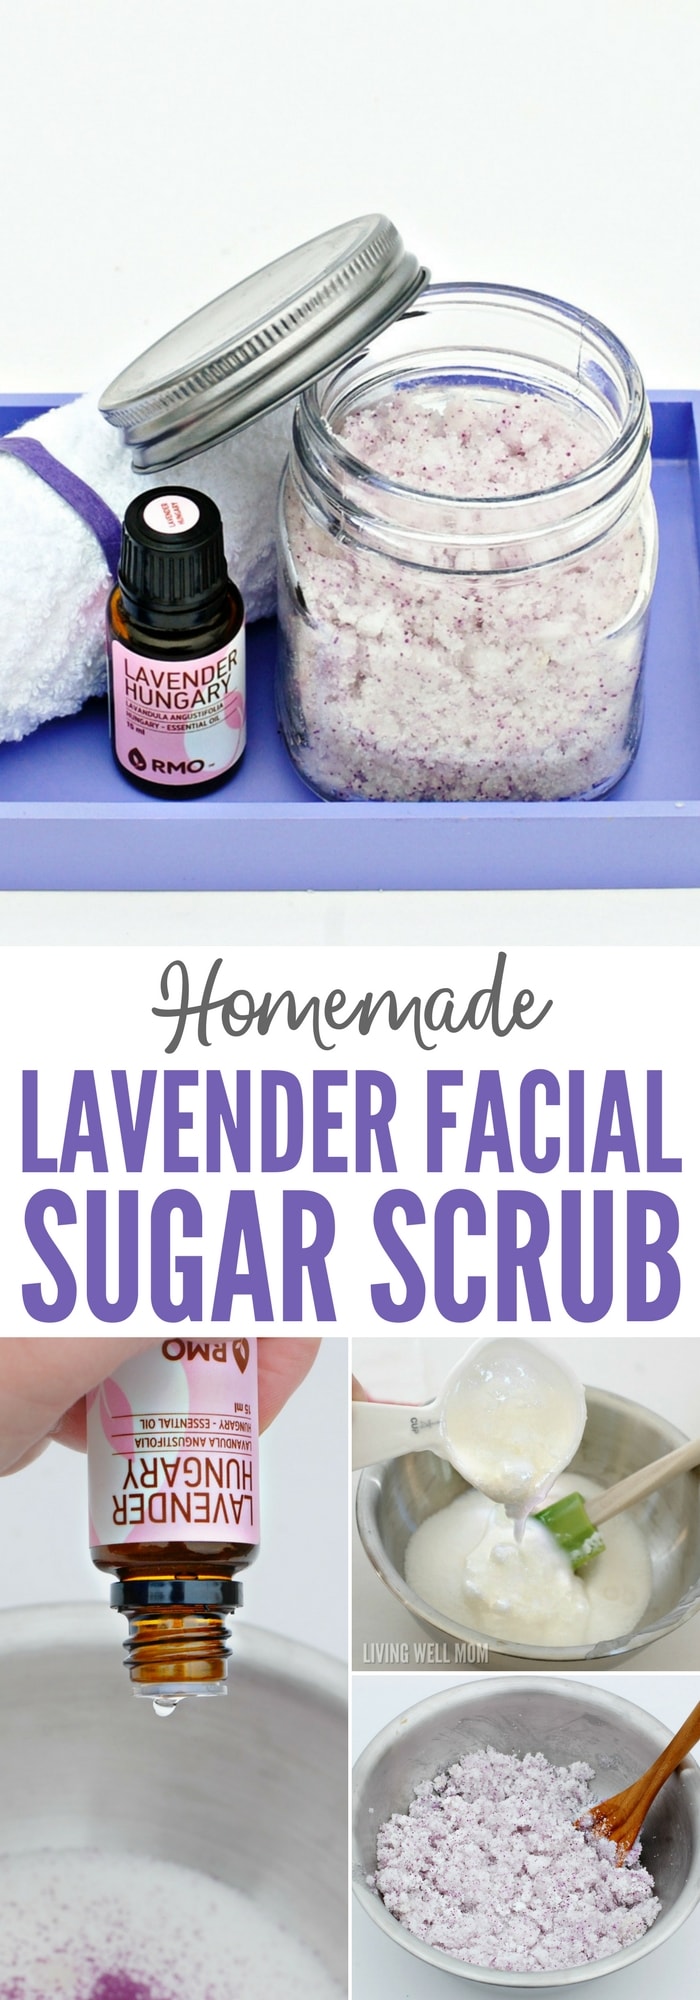 This homemade lavender facial sugar scrub is easy to make and a wonderful way to pamper yourself. Using 3 all-natural ingredients, this sugar scrub works as an exfoliator to remove dead skin cells and moisturizer at the same time. Plus it only takes about 5 minutes to make!